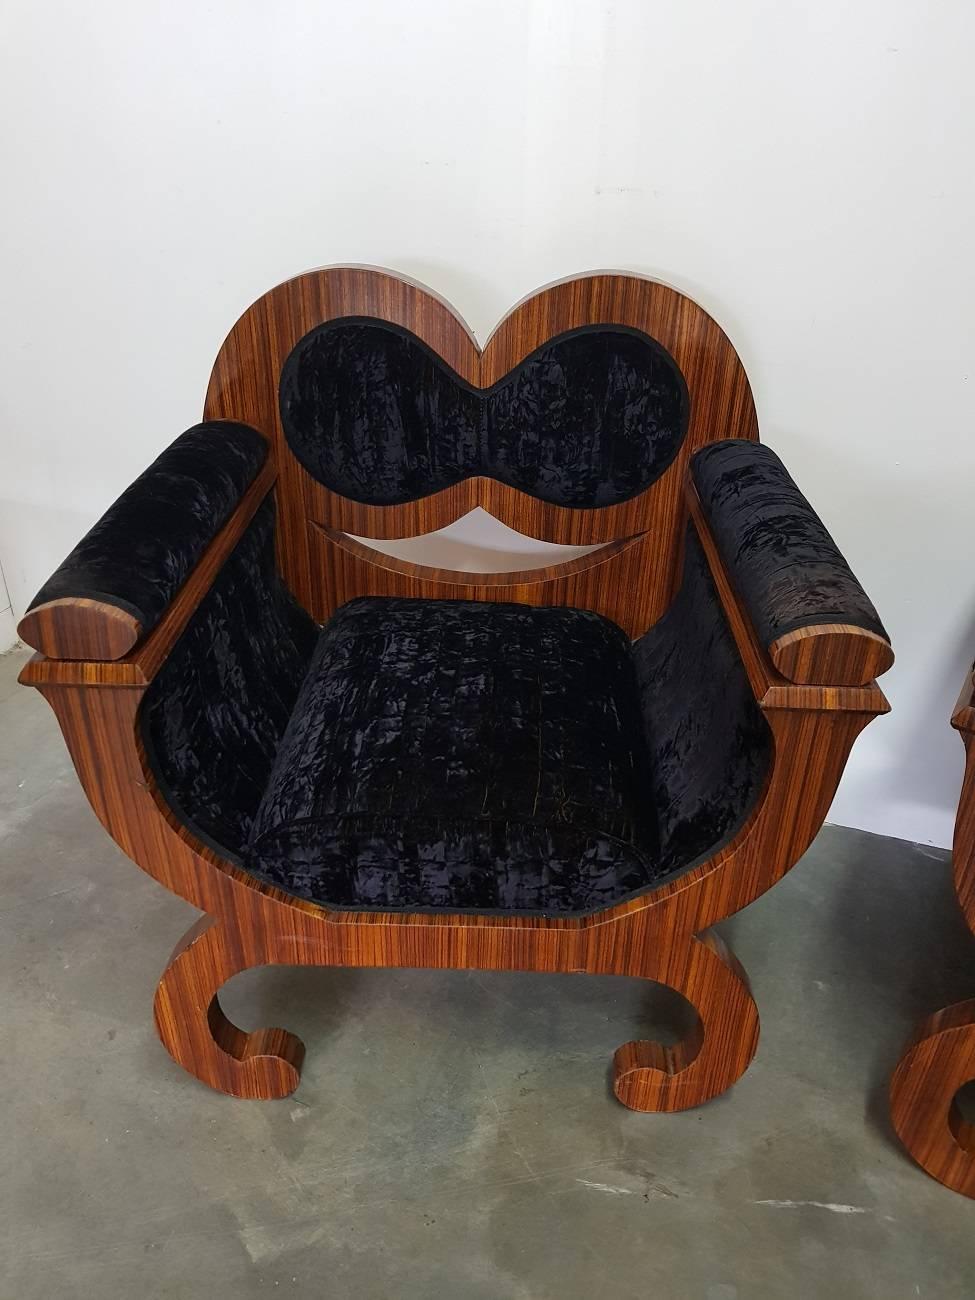 Set of two identical Italian armchairs / seats from circa 1960-1970, decorated with rosewood veneer and it has the original upholstery a purple velvet with gold-colored warp. Both are in a good state only some wear consistent of age and use.

The